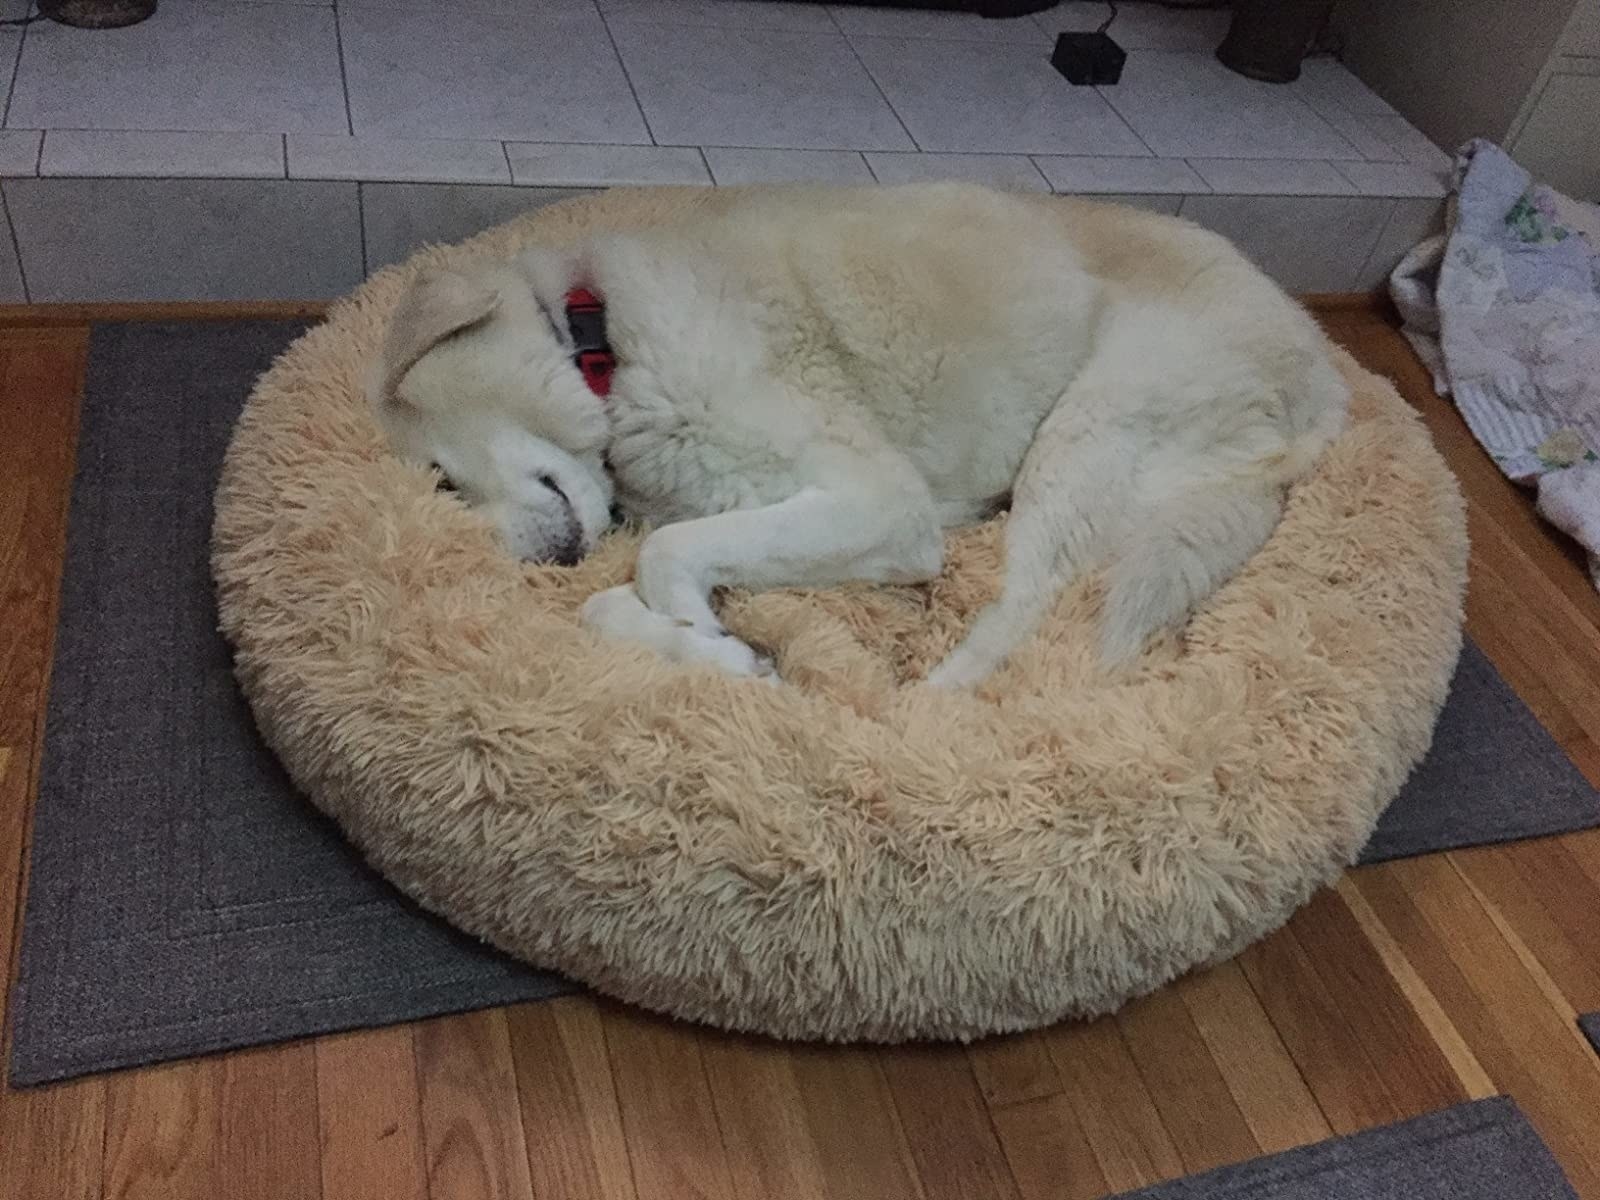 The bed, which is fluffy, round, and made of faux fur